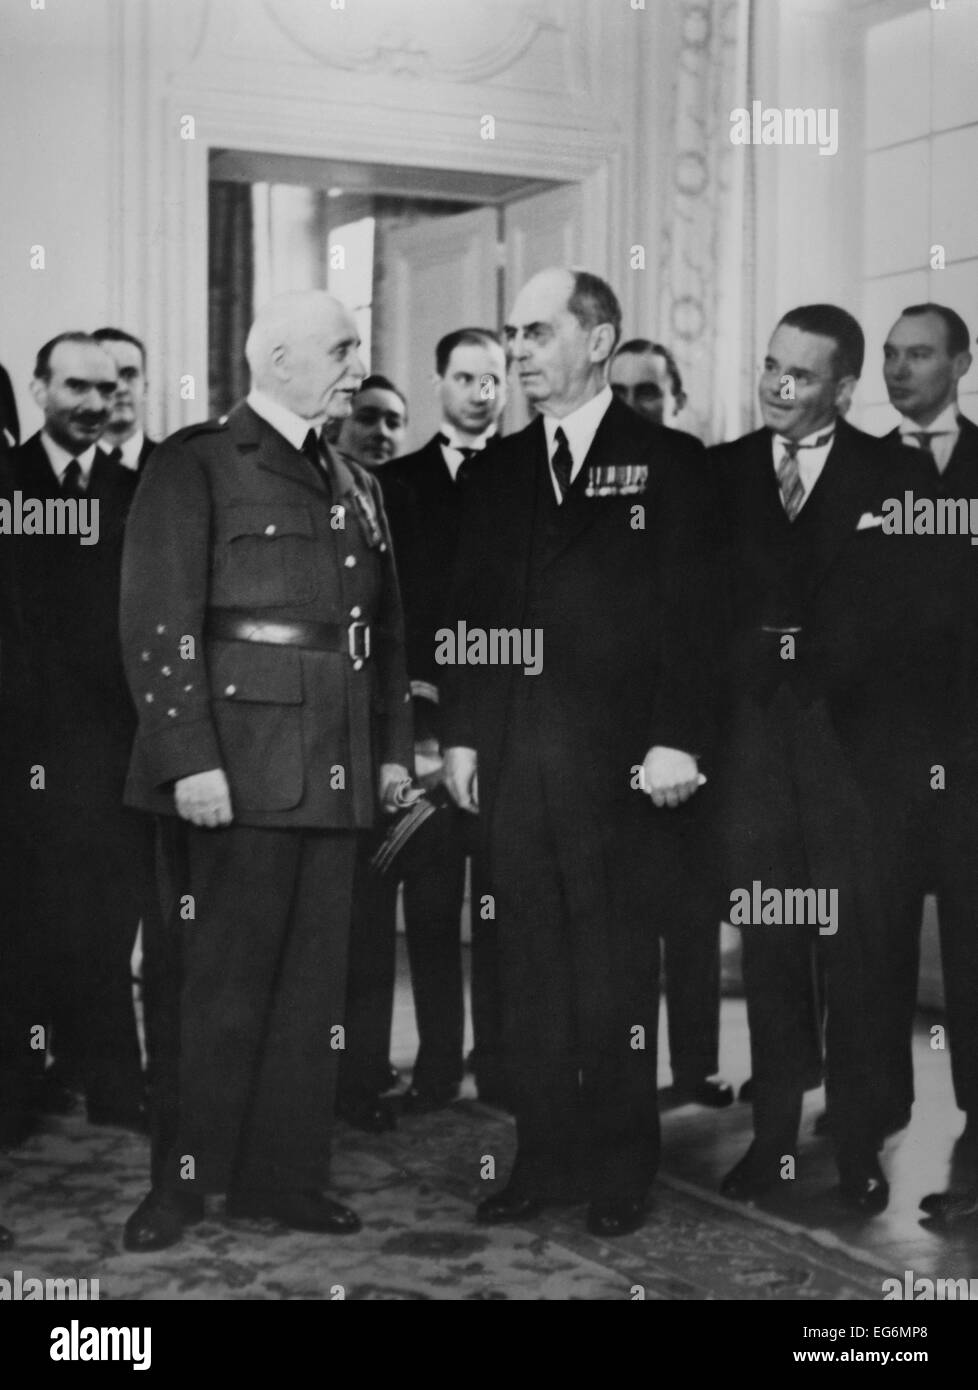 Ambassador William Leahy presenting credentials to Marshal Petain, at Vichy, France. July 8, 1941. While recognition of the Stock Photo